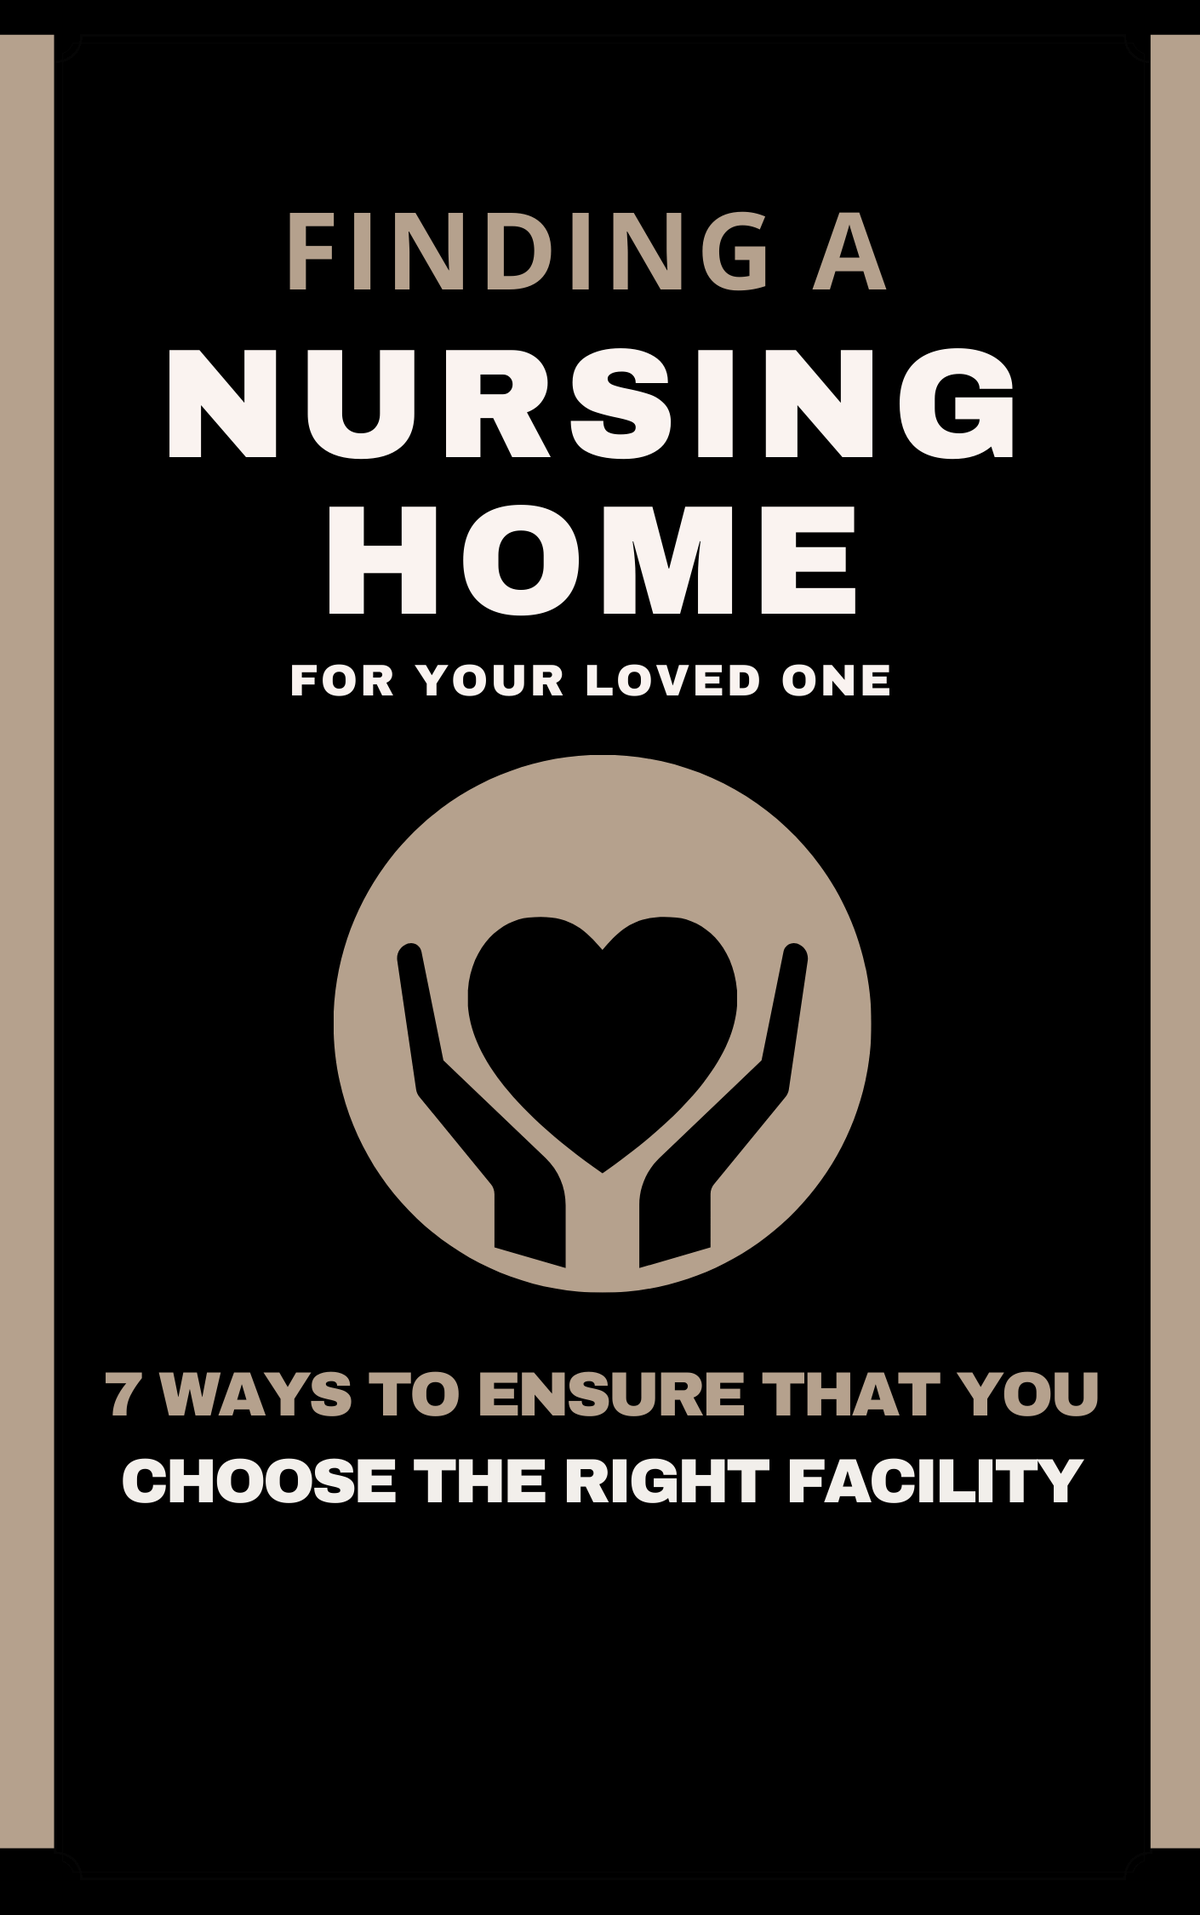 Finding a Nursing Home for Your Loved One